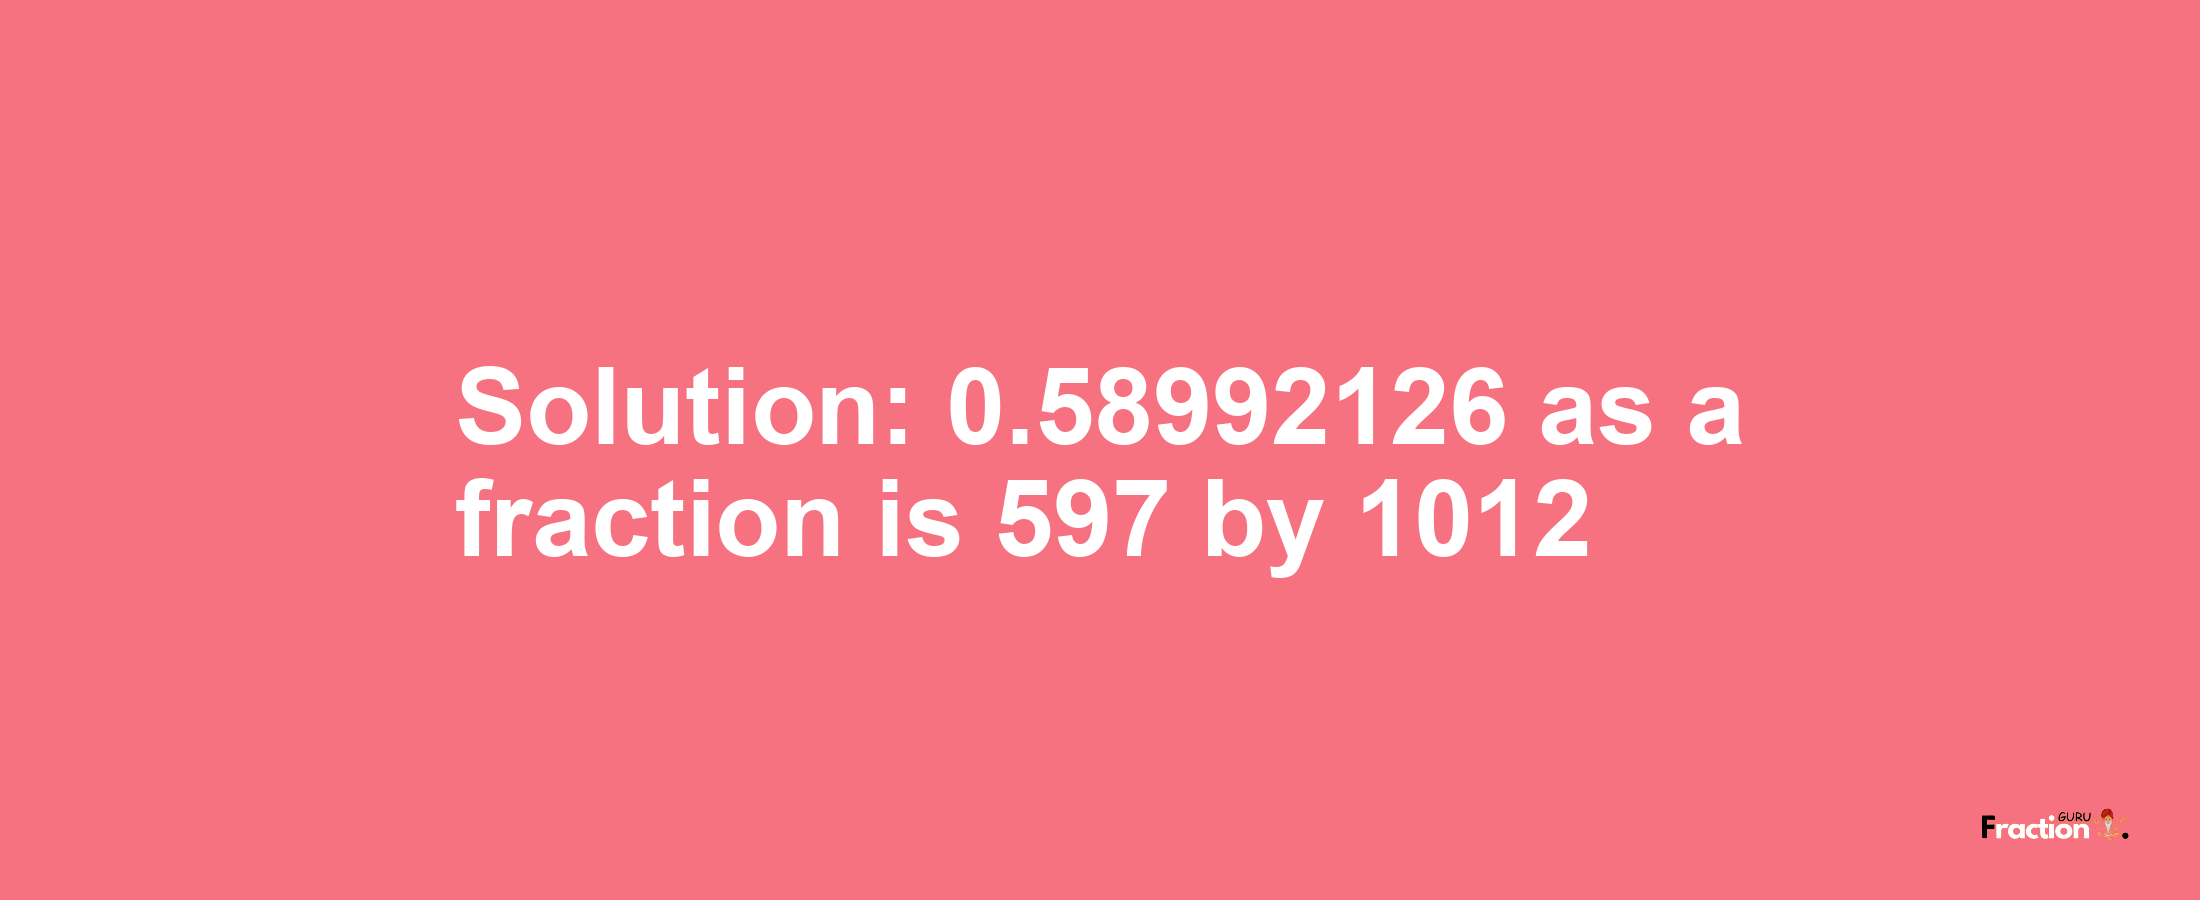 Solution:0.58992126 as a fraction is 597/1012